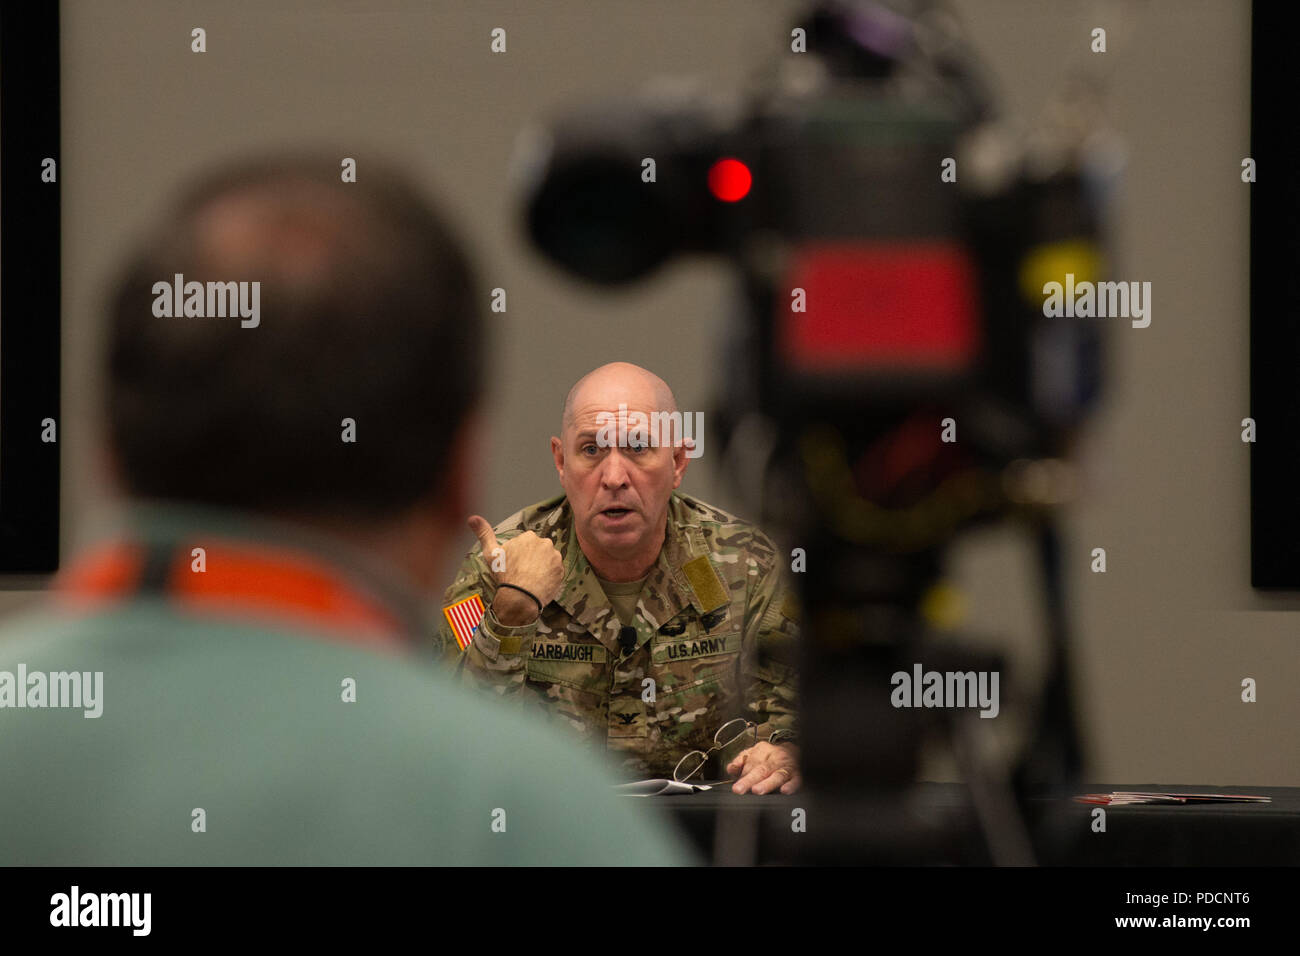 Army Col. Cary Harbaugh, U.S. Special Operations Command Warrior Games 2019 director, briefs local media on the 2019 DoD Warrior Games in Tampa, Fla., Aug. 6, 2018. The games, scheduled from June 21-30, introduce wounded, ill and injured service members and veterans to paralympic-style sports. More than 300 athletes will compete in 14 events located in downtown Tampa and surrounding areas. (Photo by U.S. Air Force Master Sgt. Barry Loo) Stock Photo